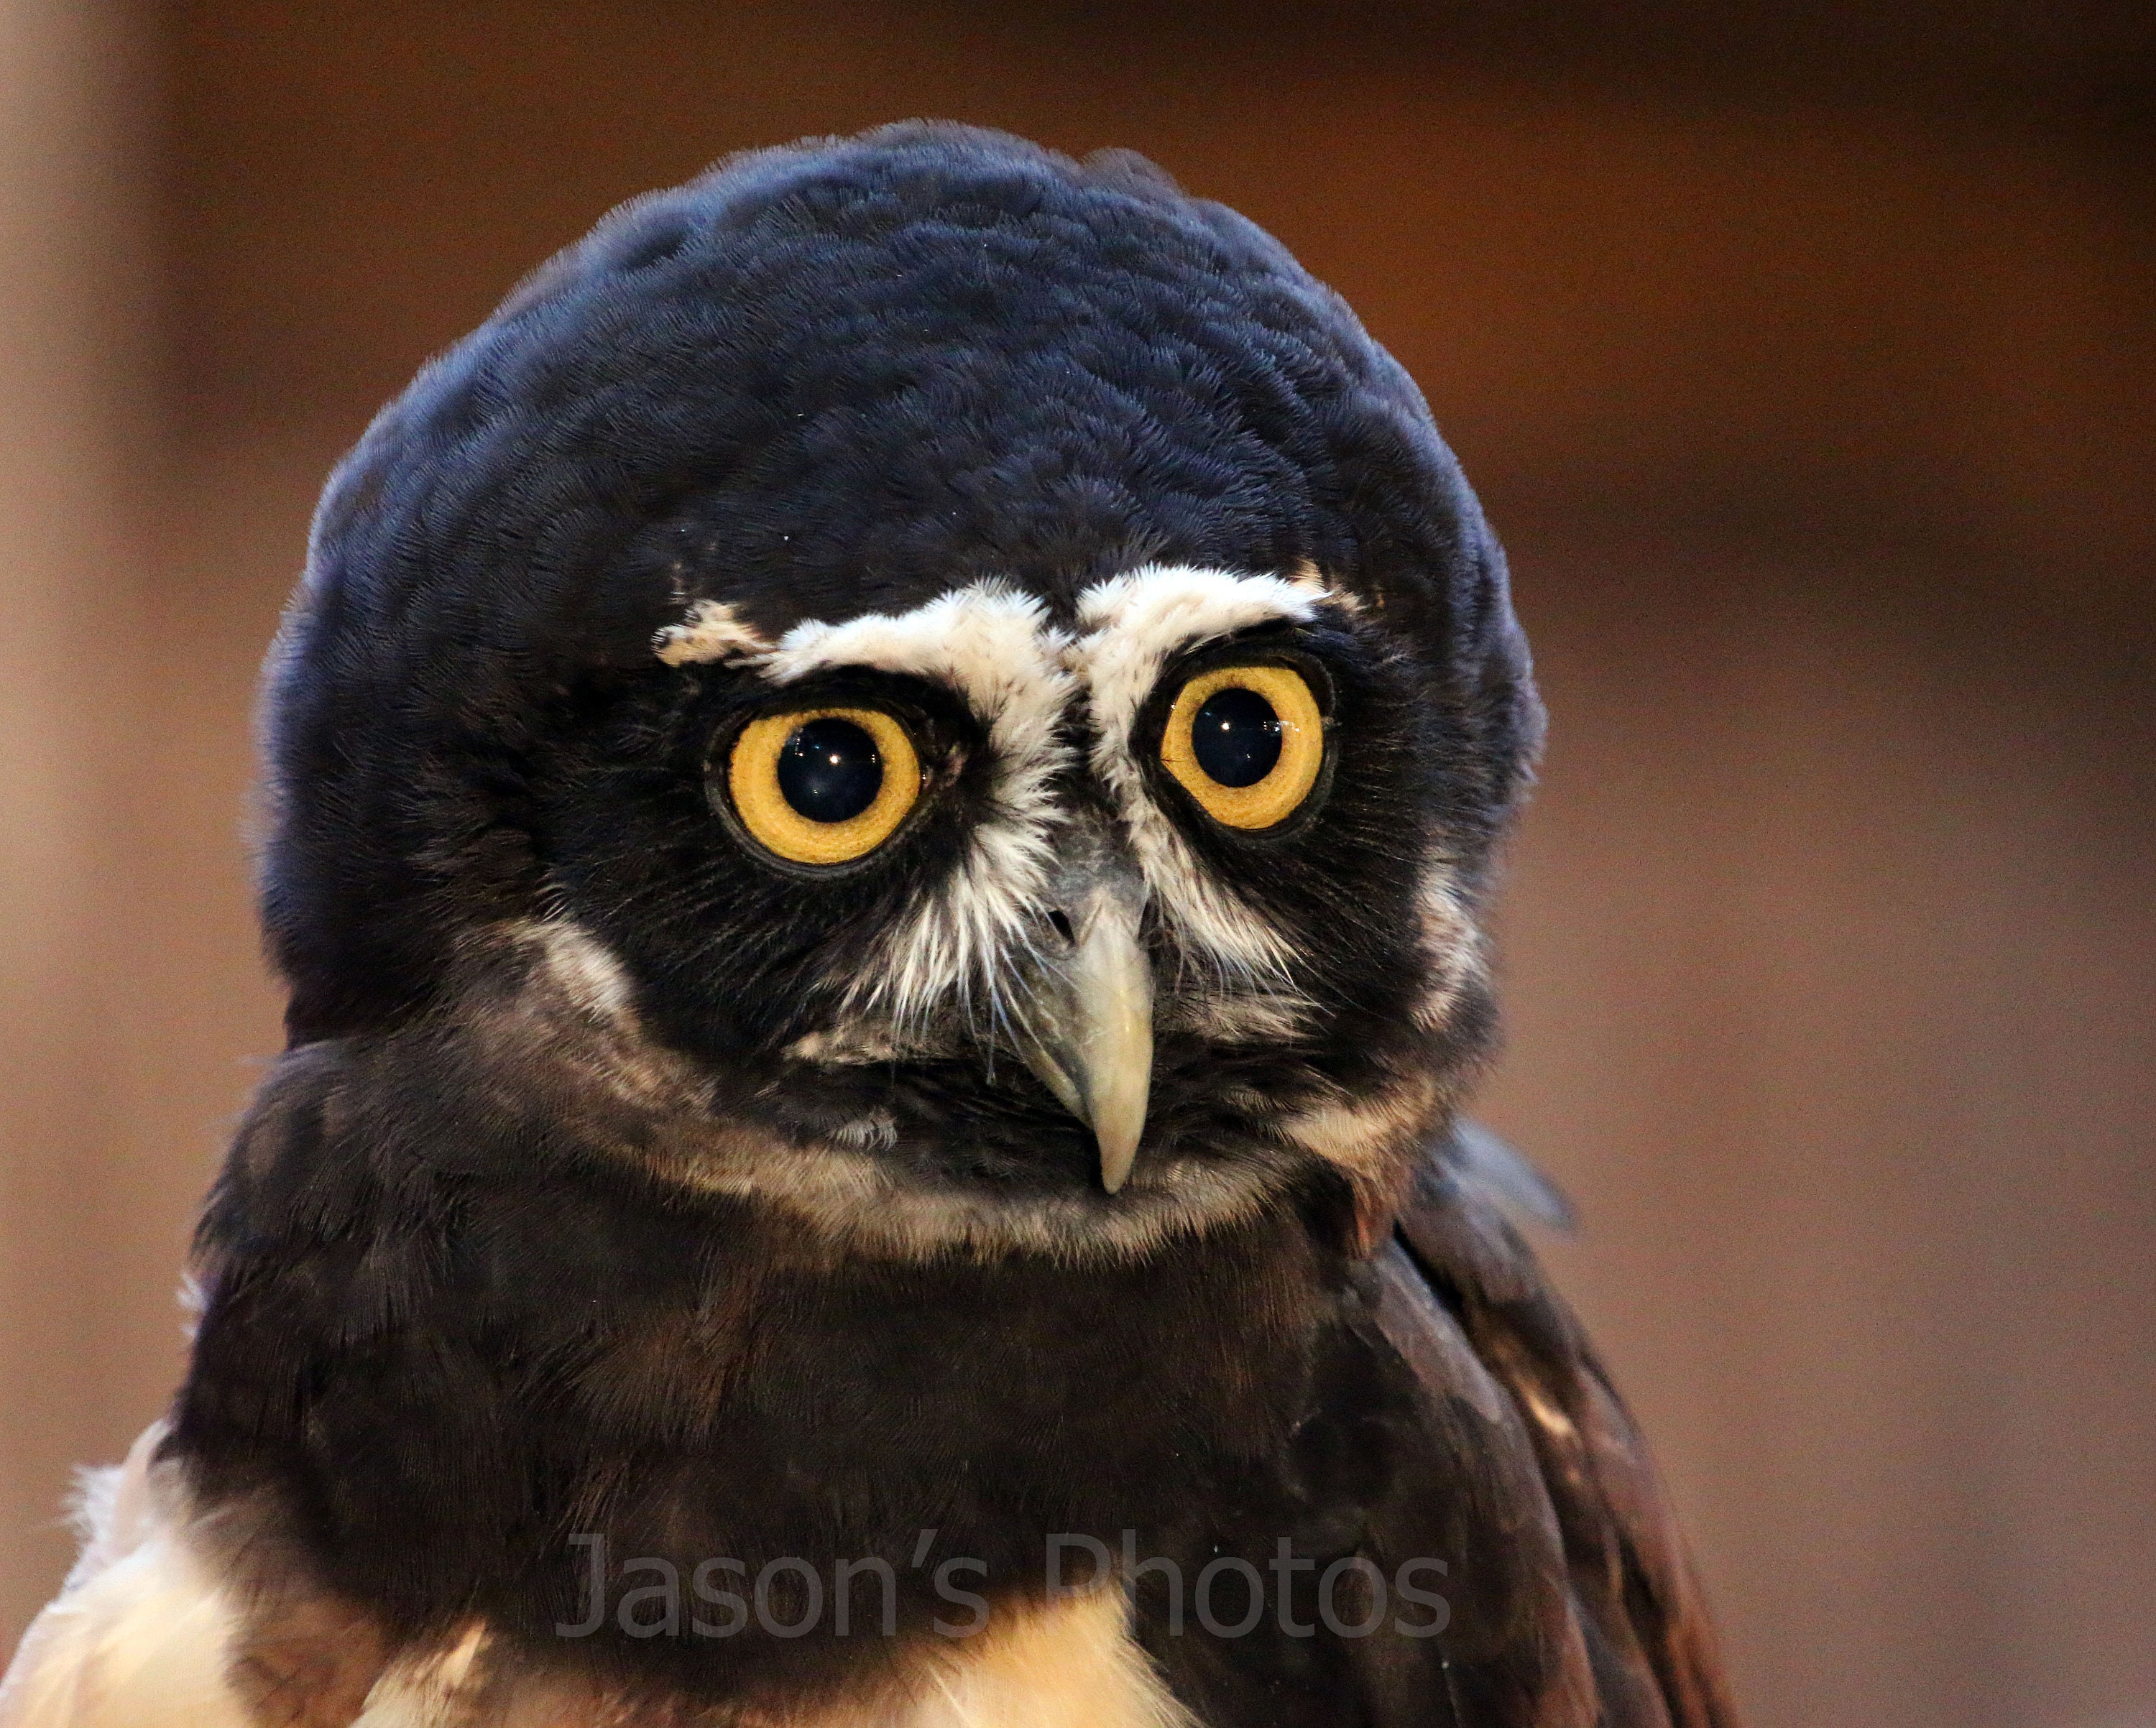 Spectacled Owl - 5x7 Photo in 8x10 granite mat.  Printed by professional photo studio on premium Kod